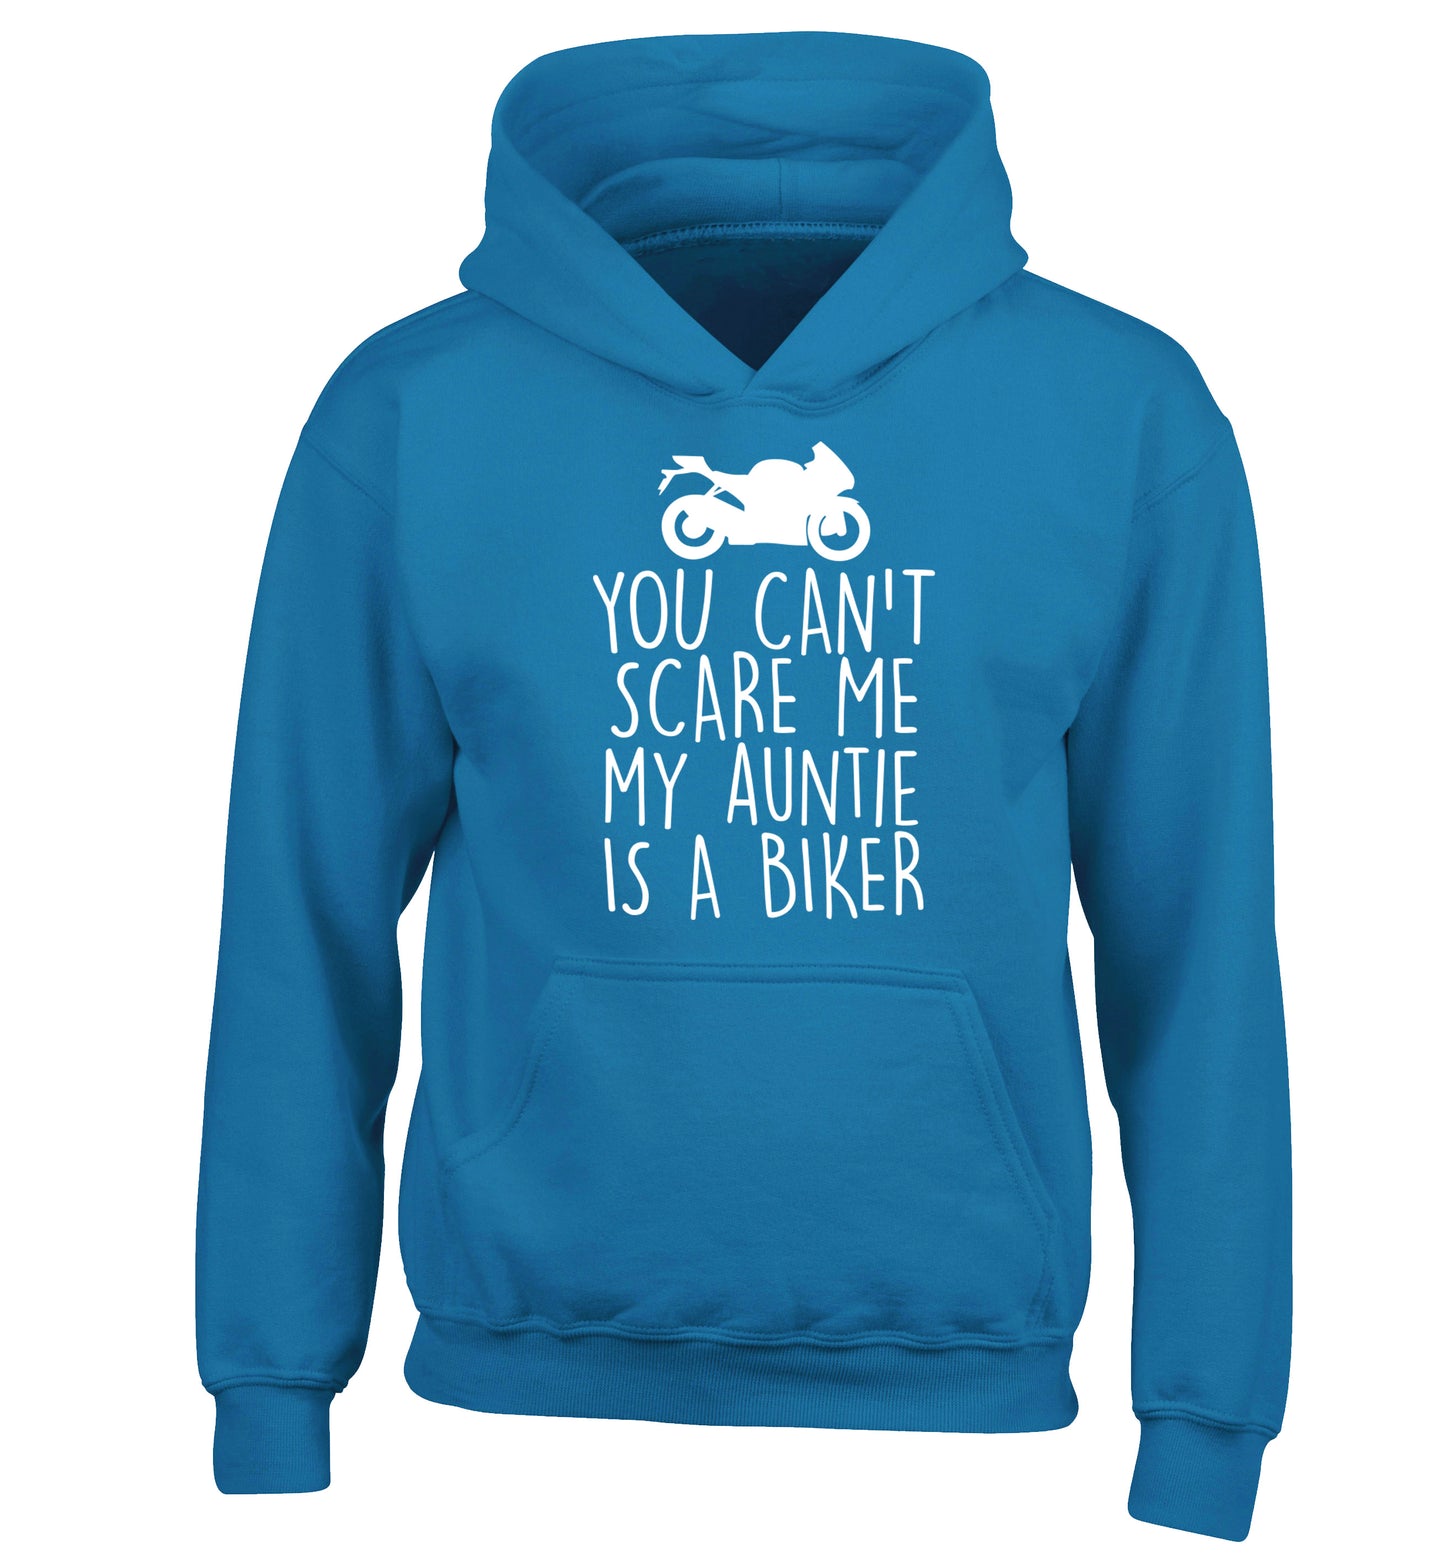 You can't scare me my auntie is a biker children's blue hoodie 12-13 Years